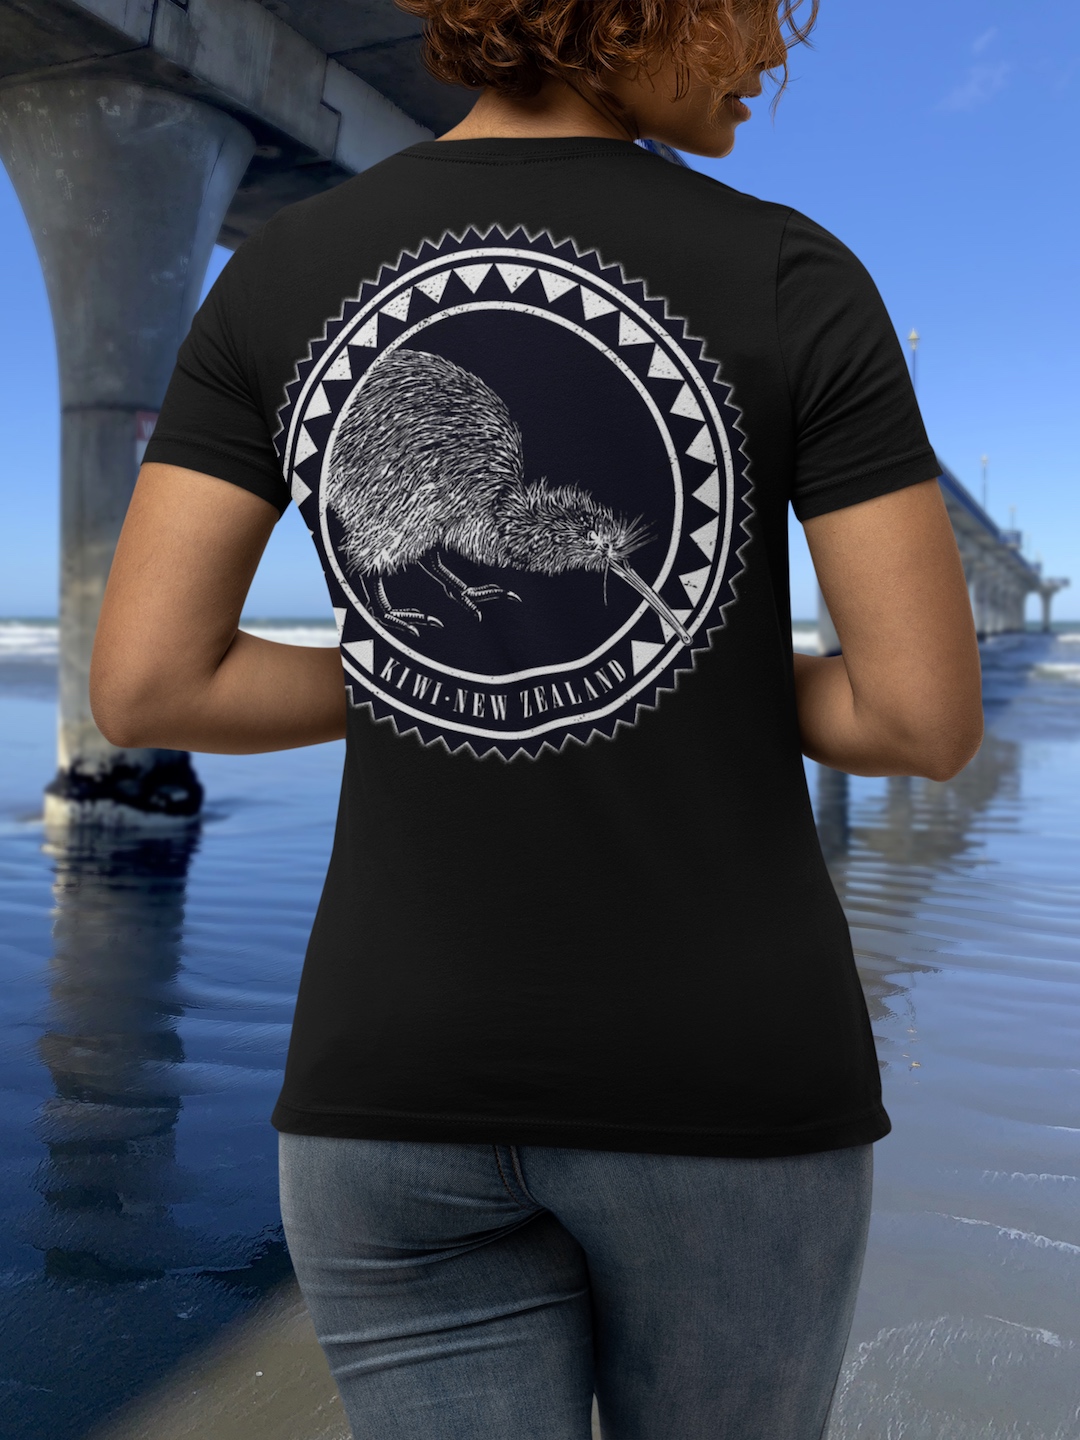 Back view of a curly-haired woman modelling the the large art of a black Surface Active iconic Kiwi, New Zealand t-shirt beside the New Brighton pier.